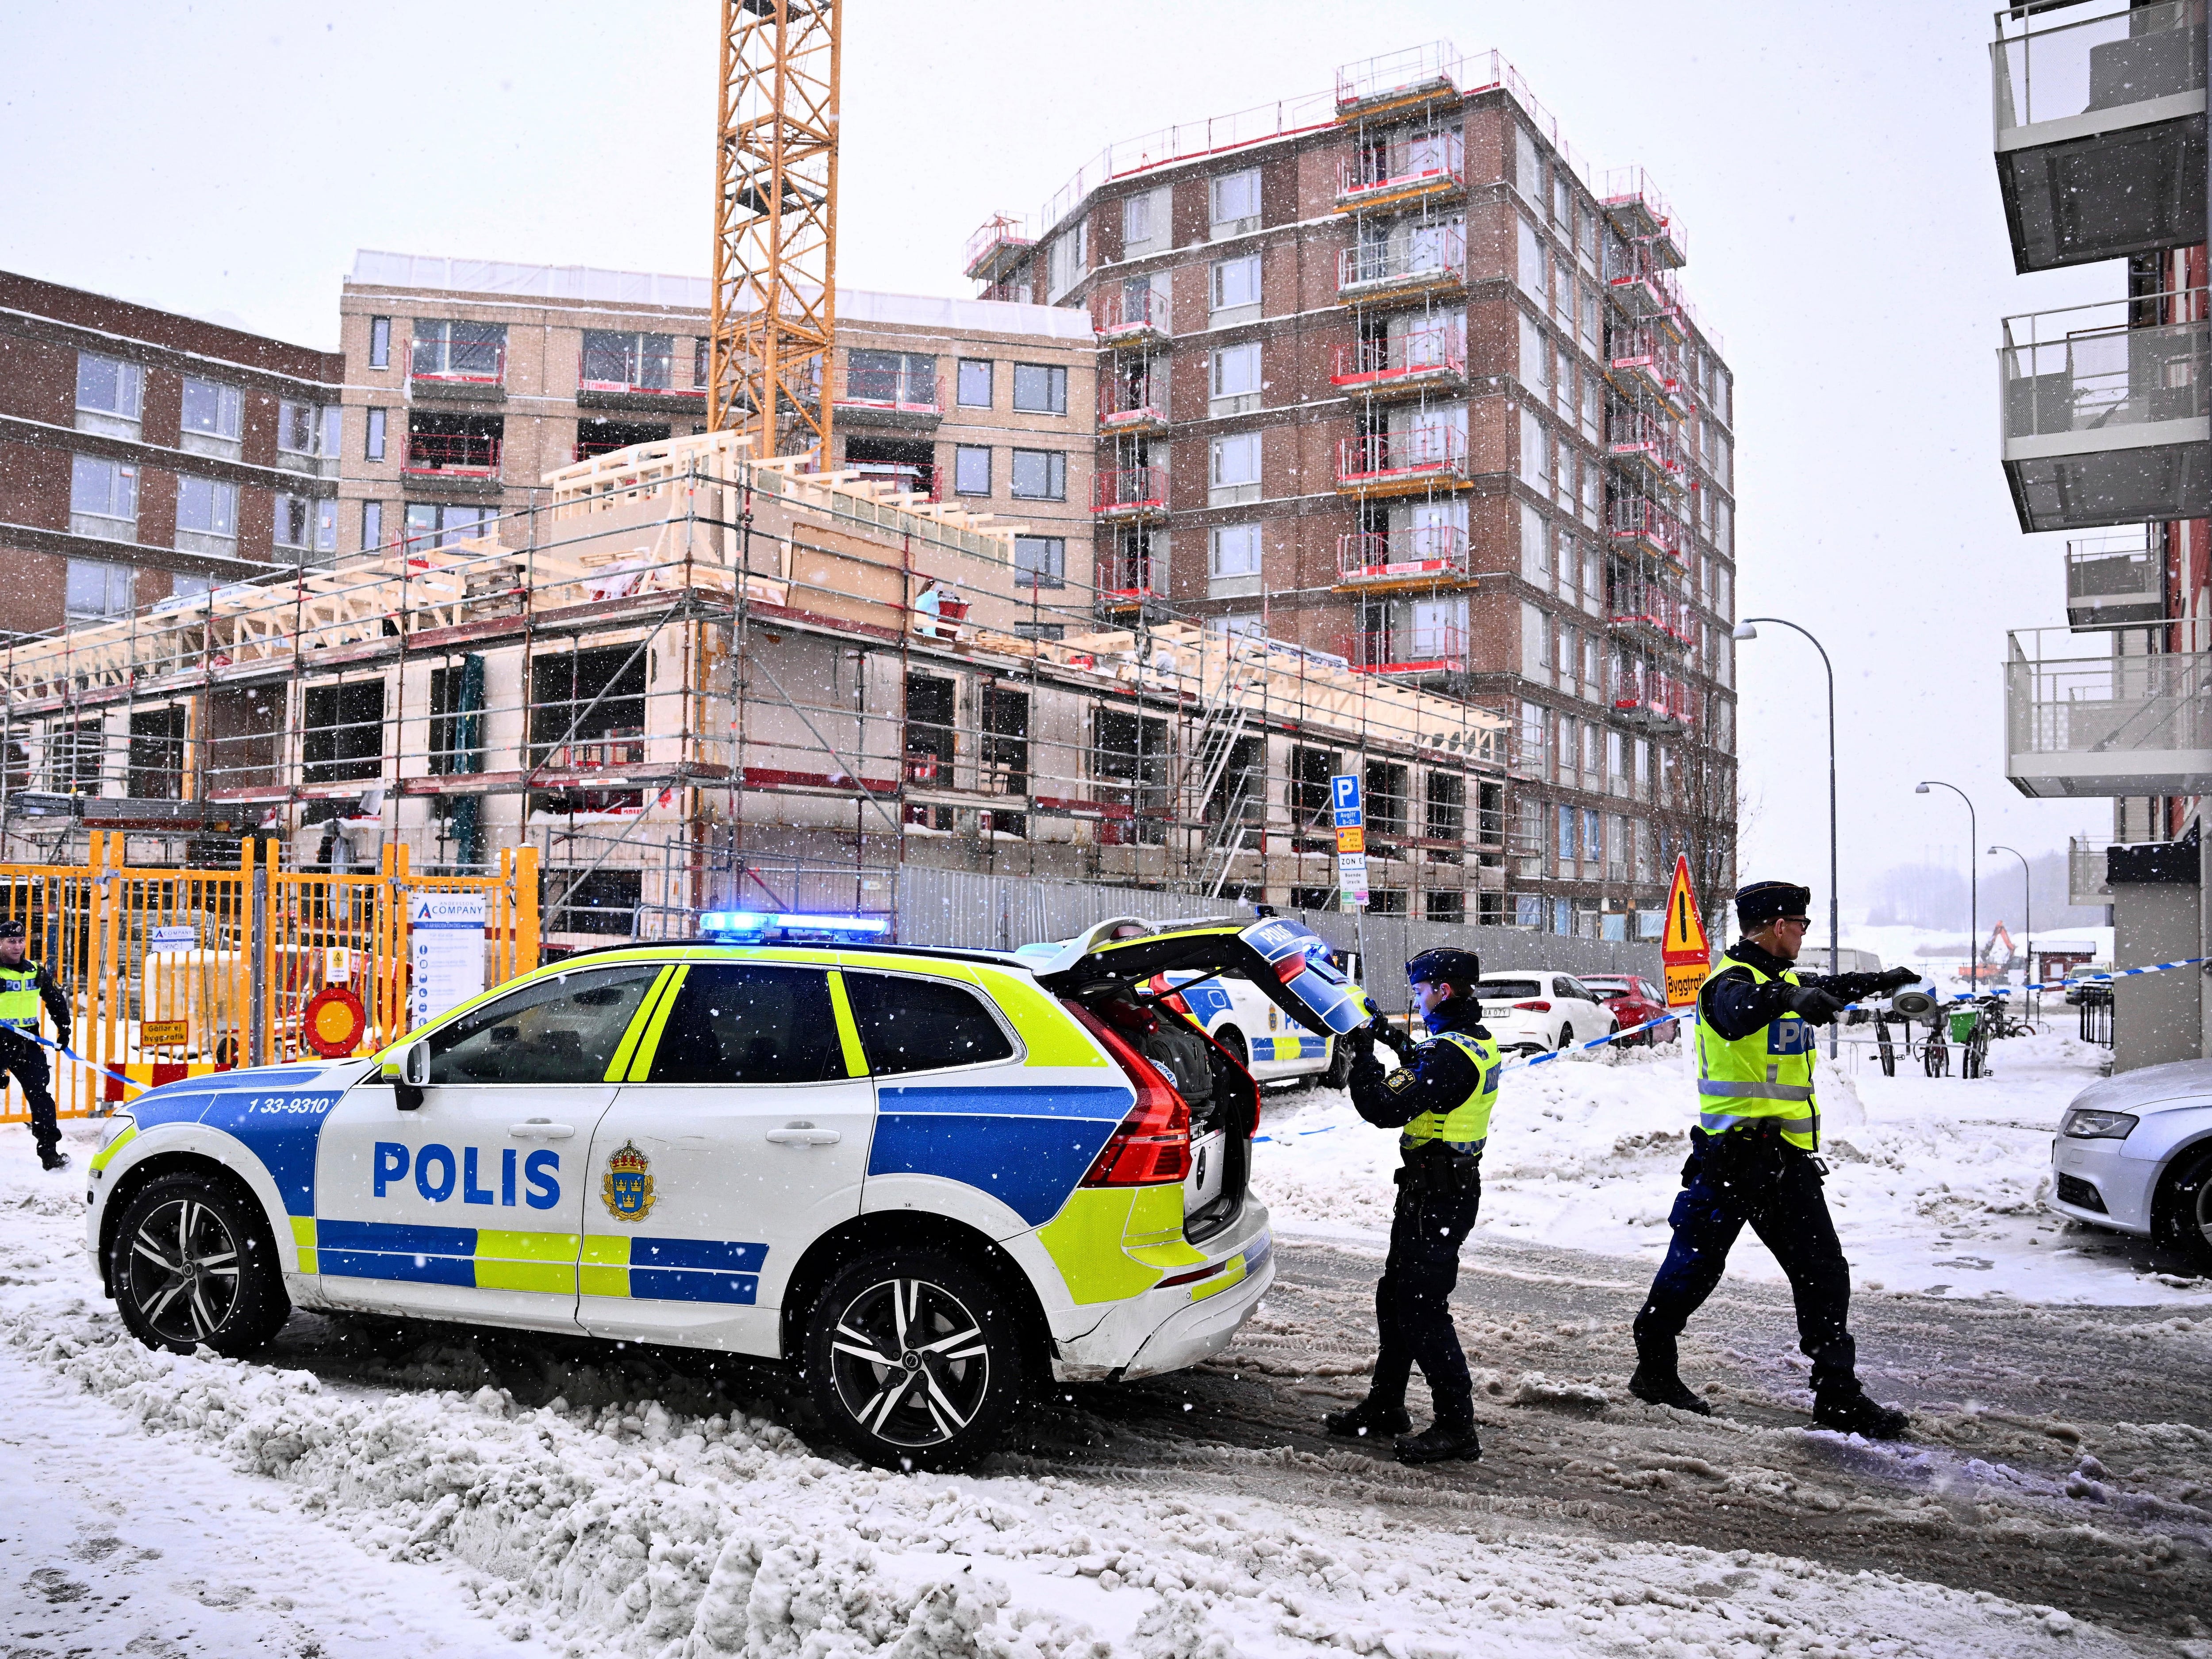 Missing nuts and bolts caused deadly construction elevator accident in Sweden